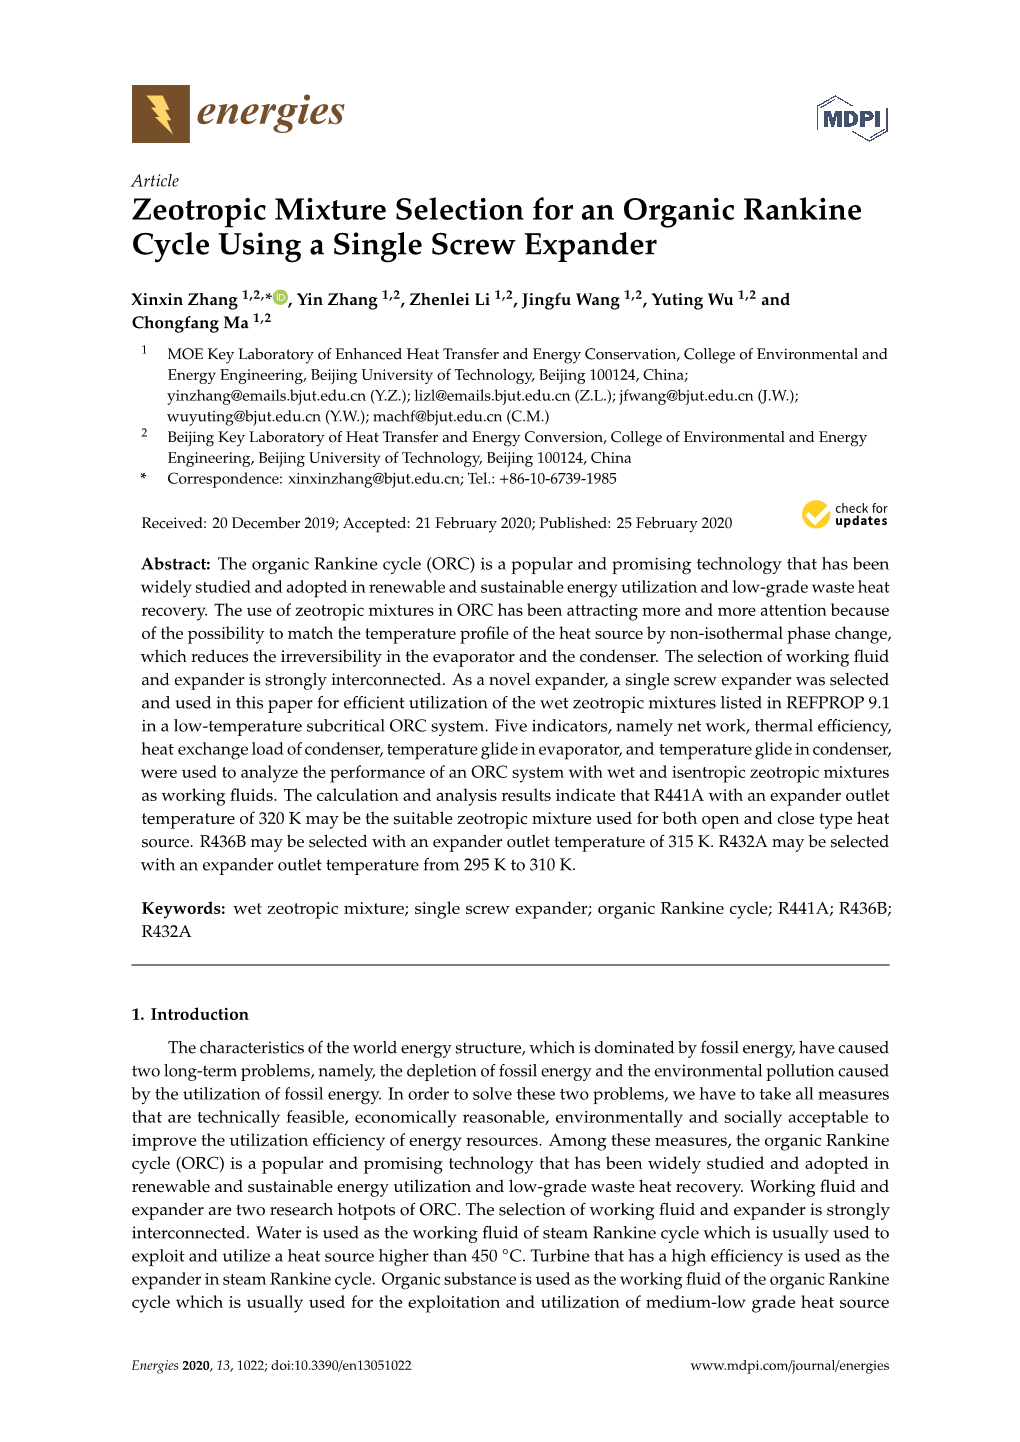 Zeotropic Mixture Selection for an Organic Rankine Cycle Using a Single Screw Expander